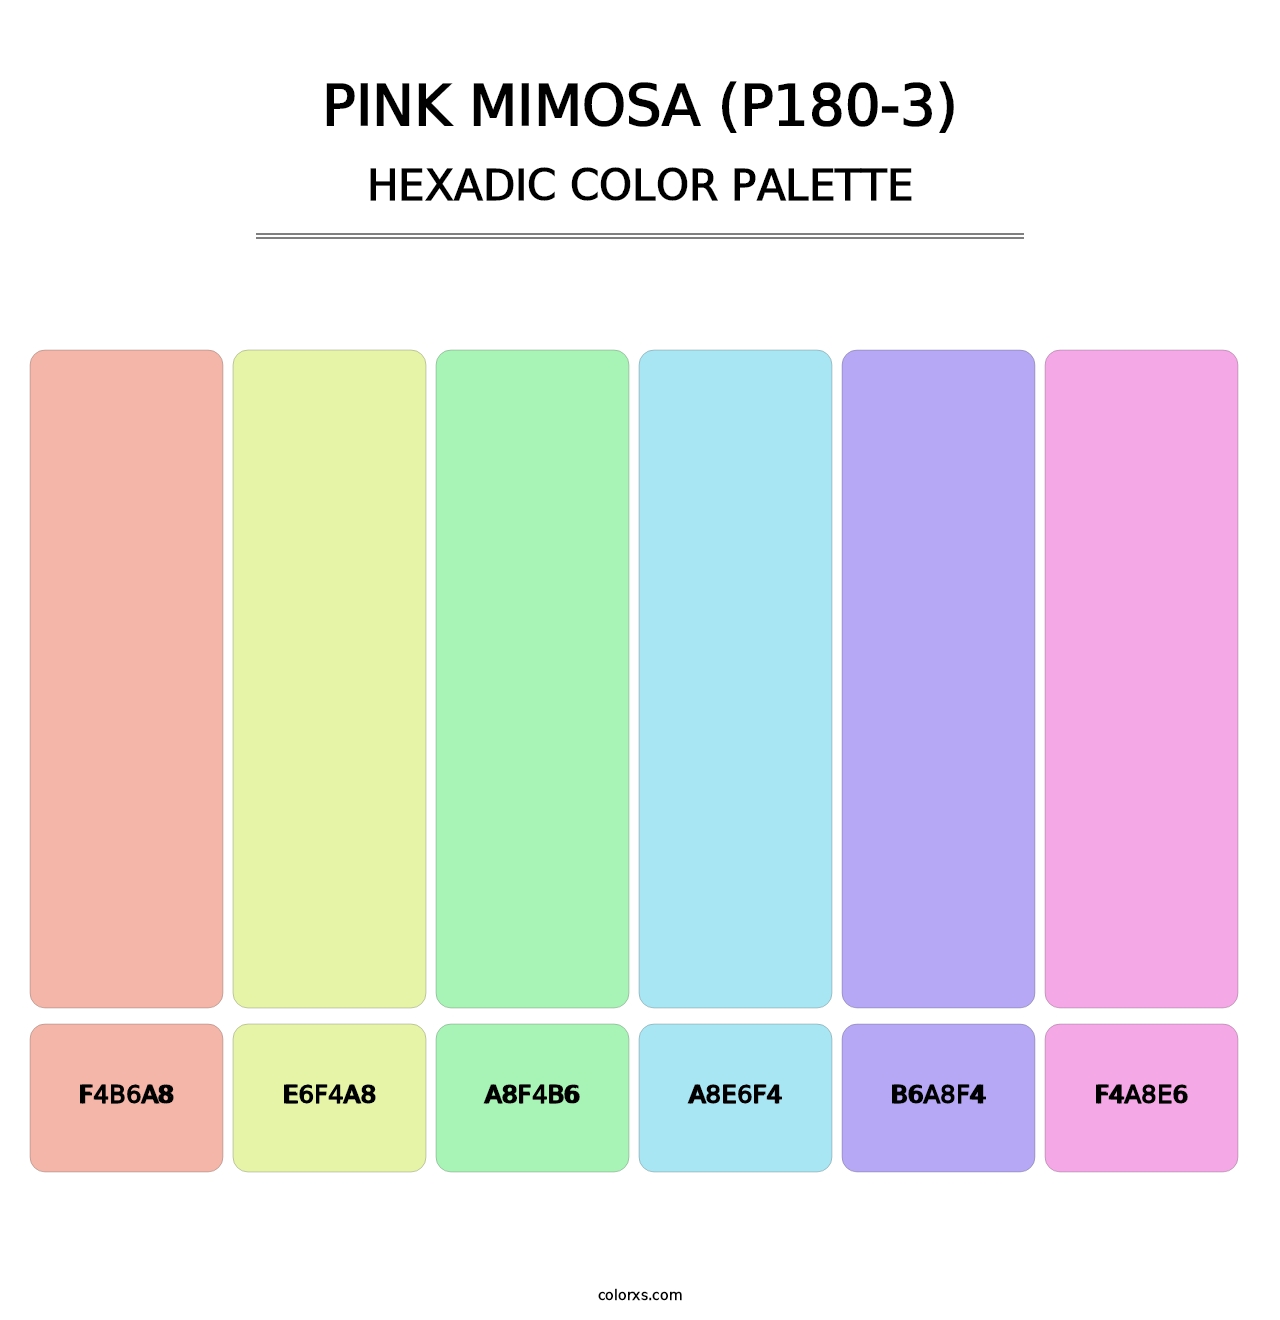 Pink Mimosa (P180-3) - Hexadic Color Palette